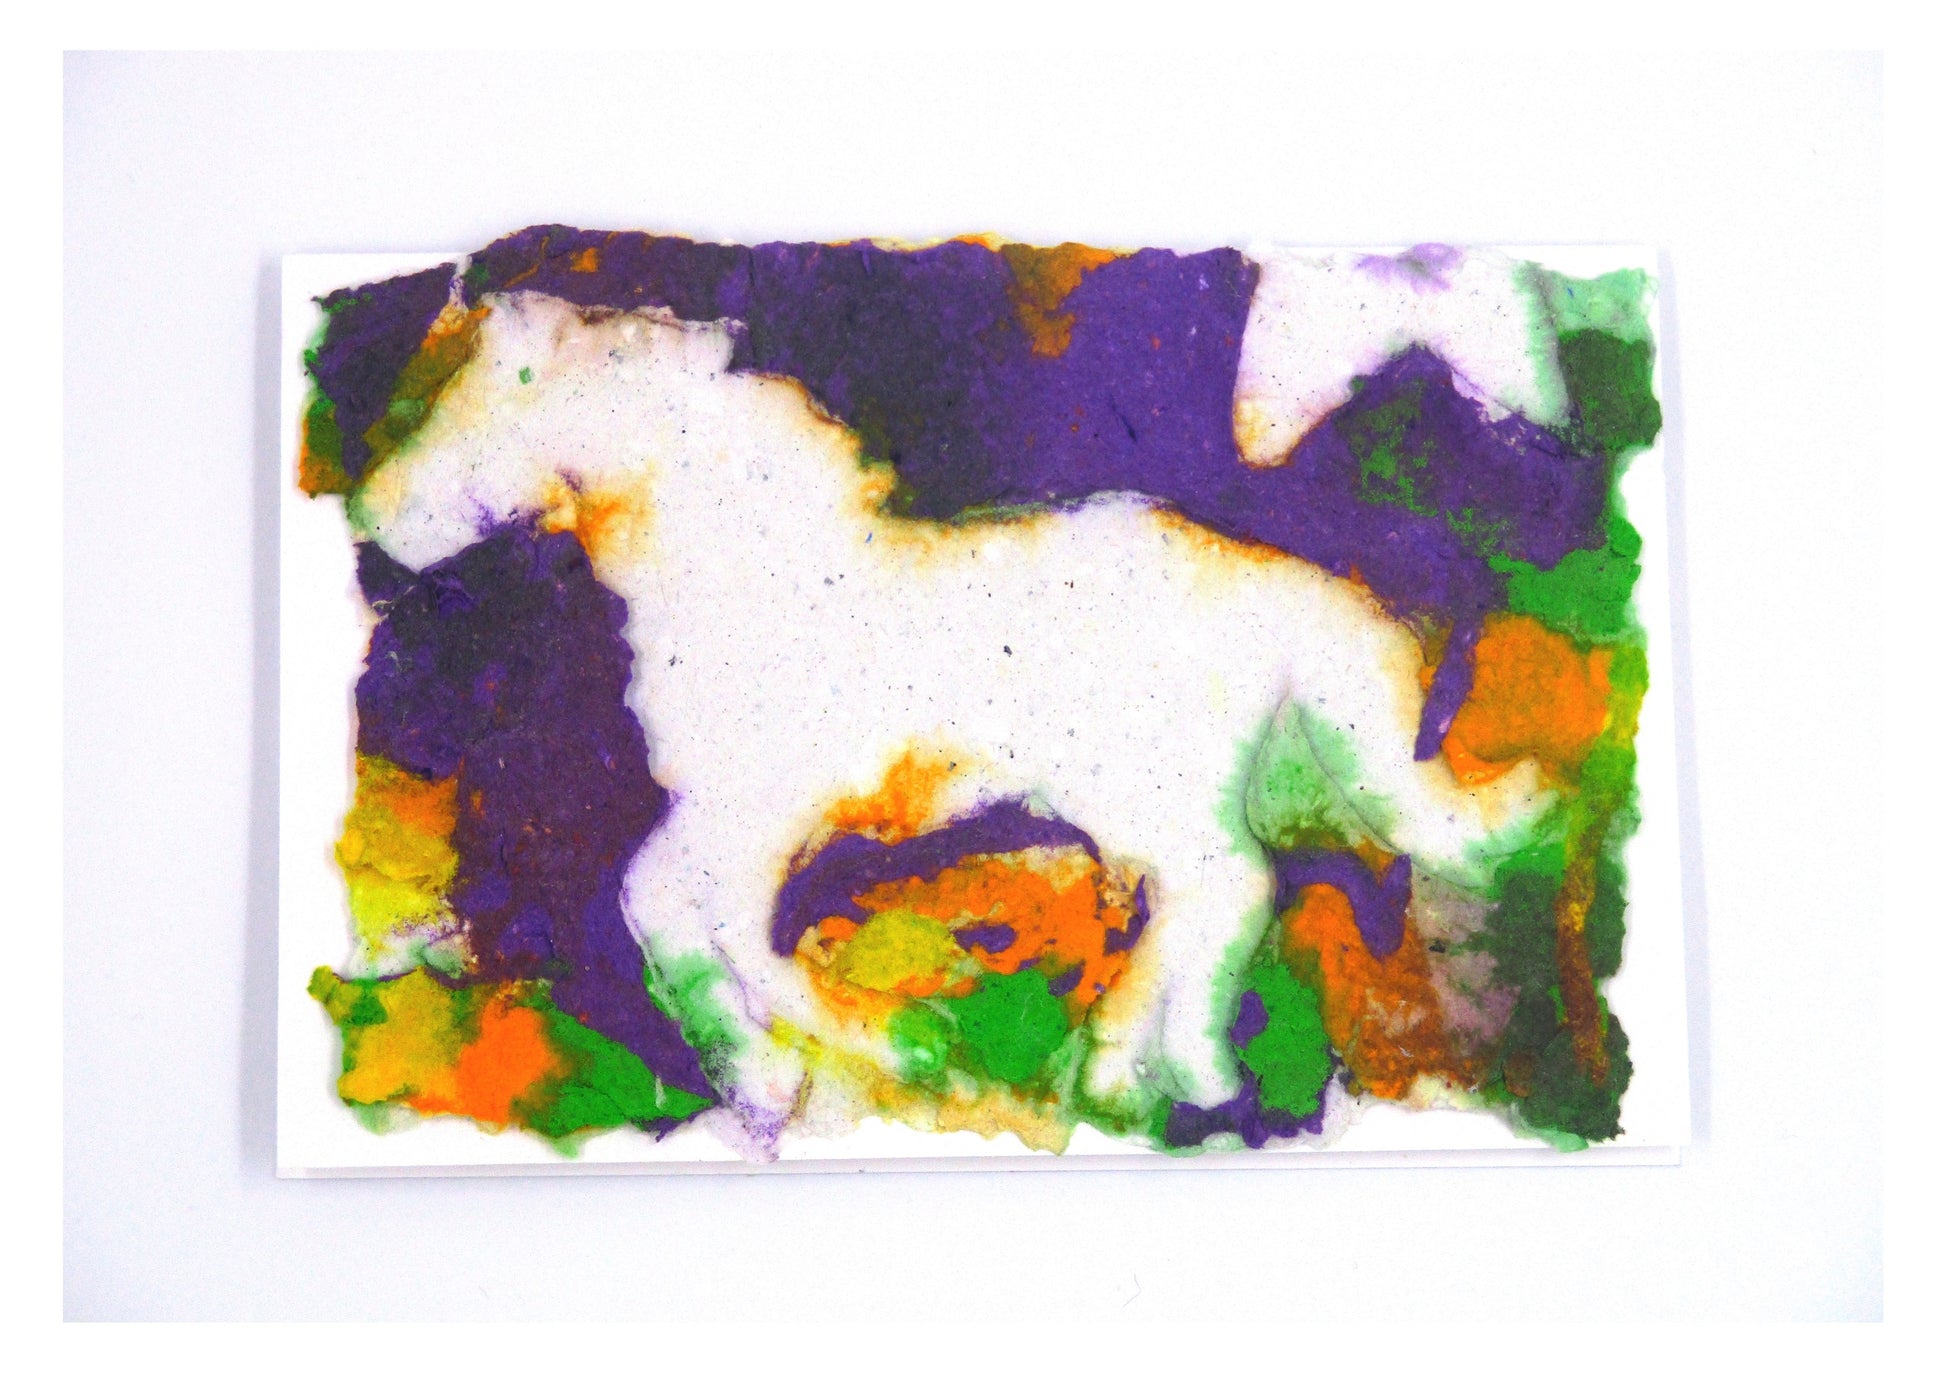 card with handmade paper design of a horse. vivid colors of purple, orange and green